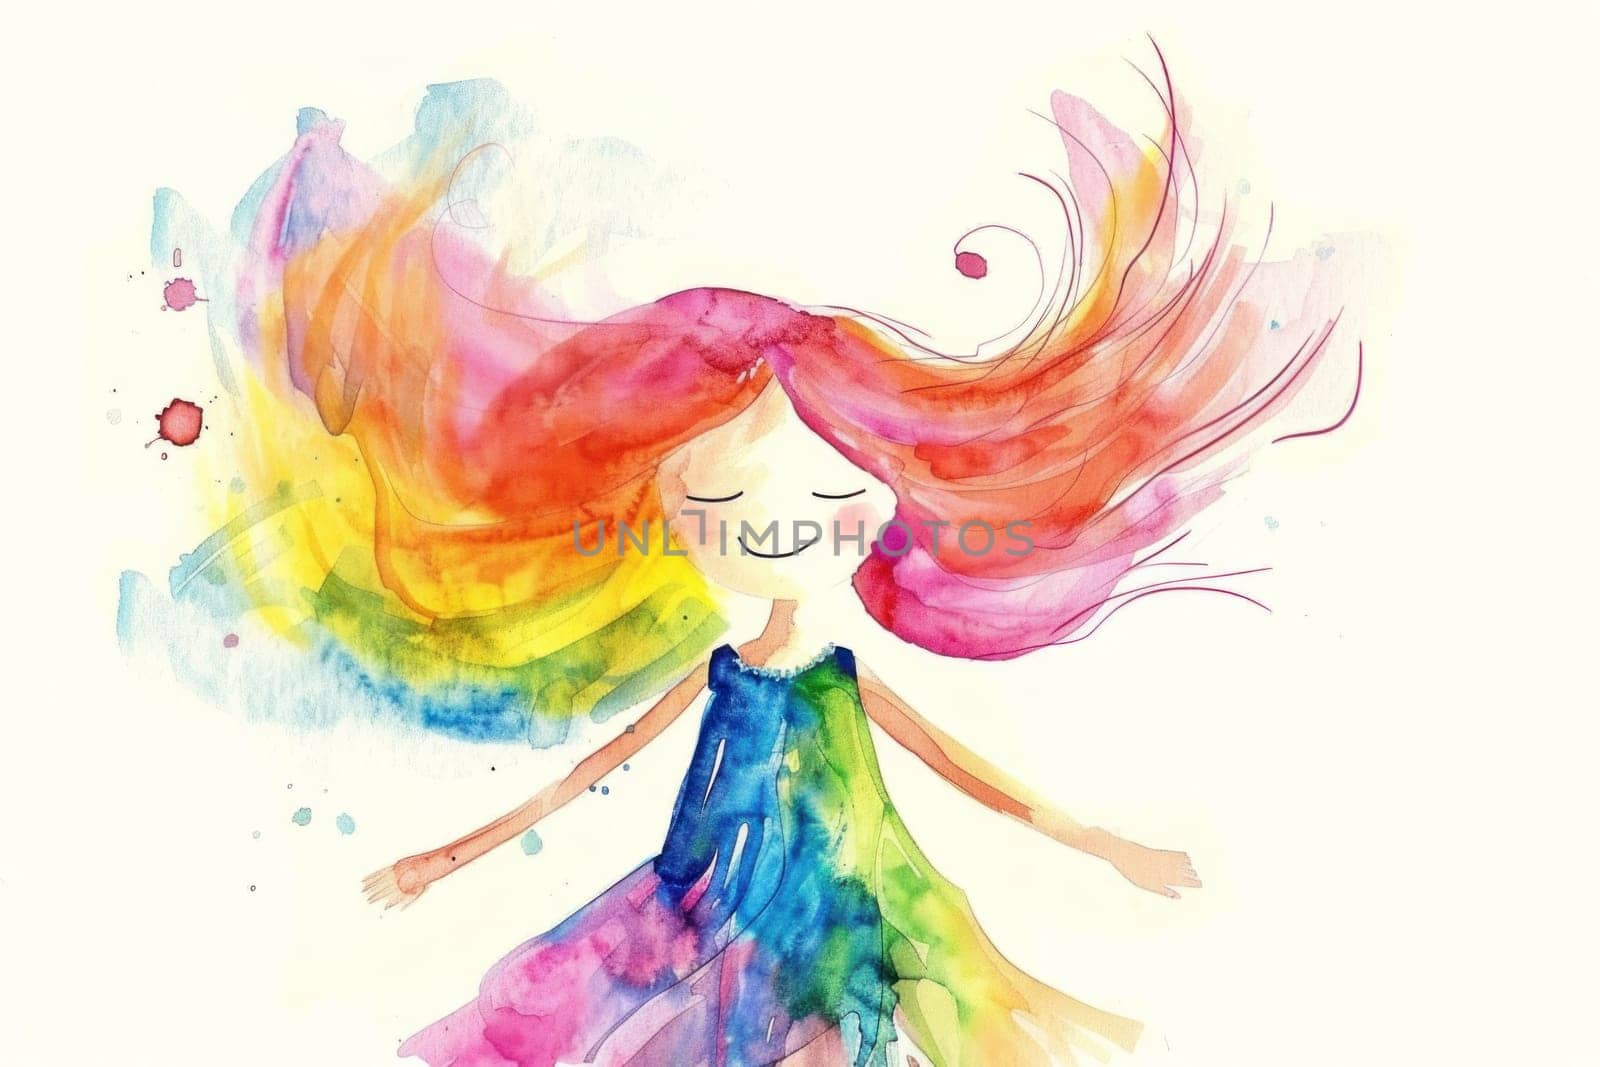 Colorful hair girl with rainbow dress in vibrant watercolor illustration on white background, art, beauty, fashion, happy, fantasy